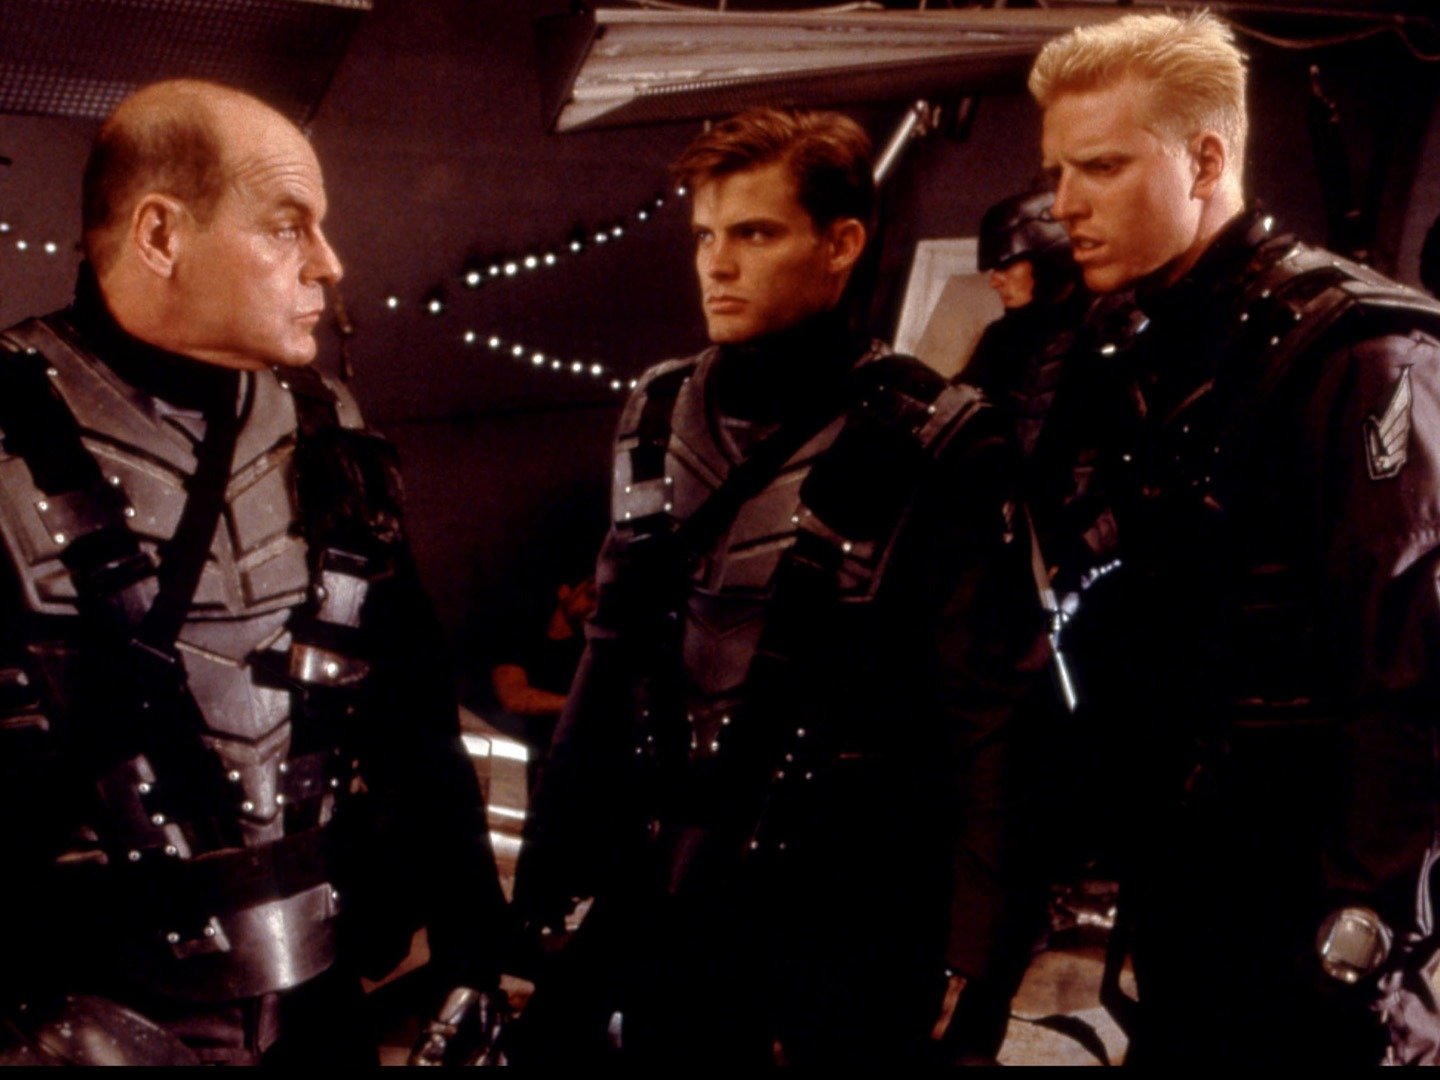 starship troopers cast